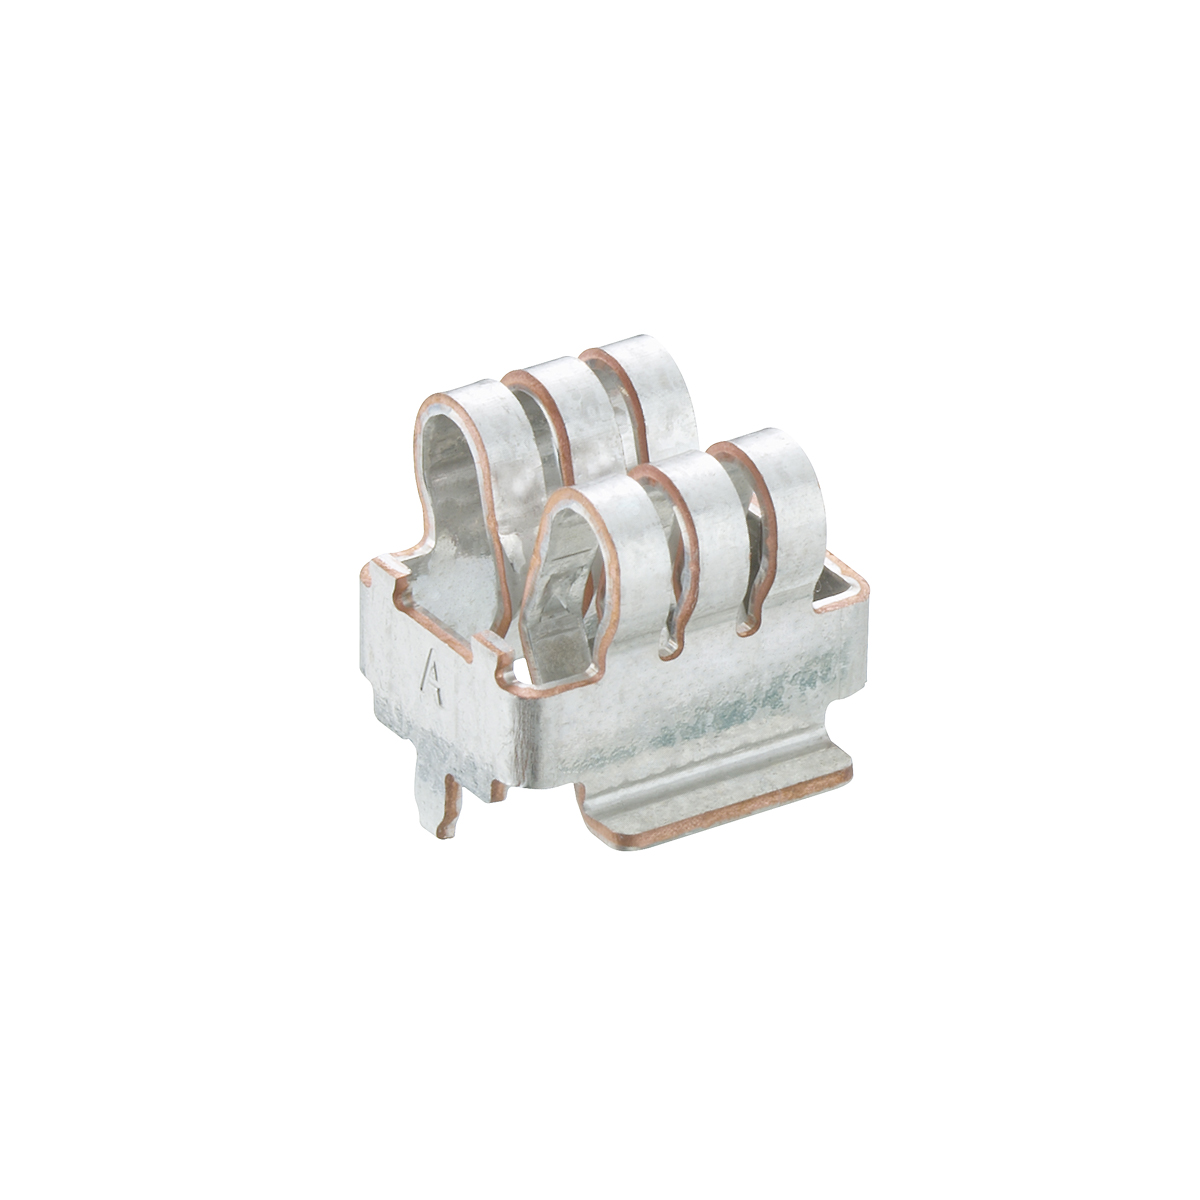 Lumberg: 4580 03 MP T0,8 (Series 45 | High-current contact elements)